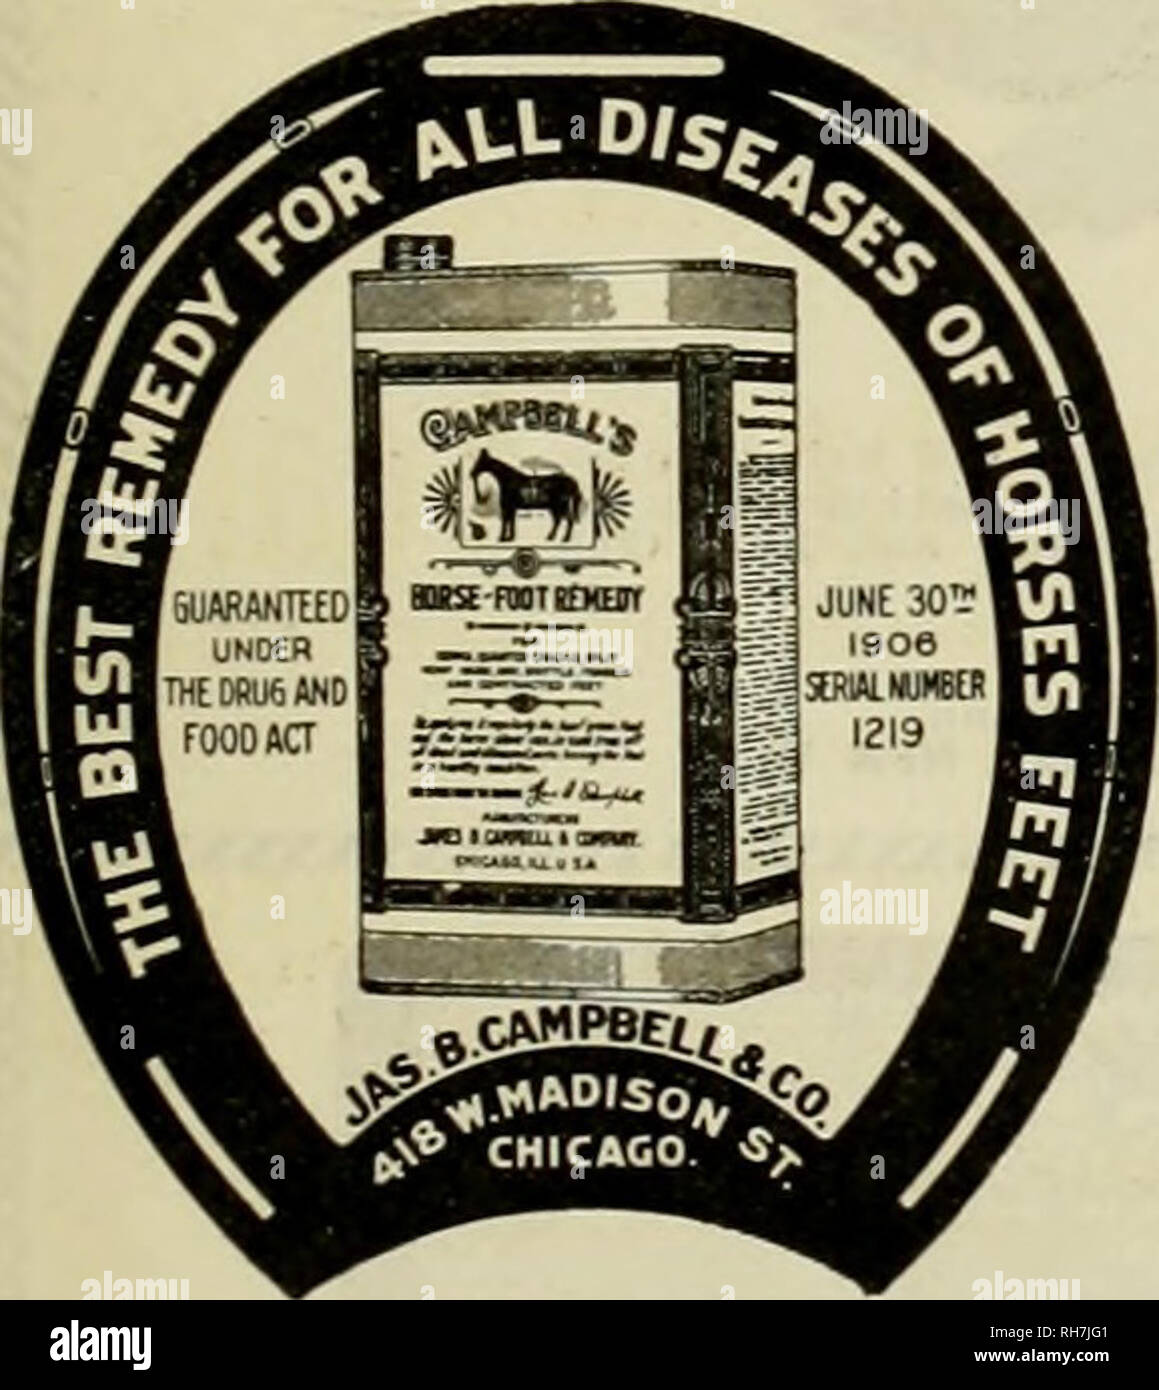 . Breeder and sportsman. Horses. STUDEBAKER BROS. &amp; CO., of Calif., Fremont and Mission Sis., San Francisco 75 PER CENT OF ALL HORSE OWNERS AND TRAINERS USE AND RECOMMEND CAMPBELL'S HORSE FOOT REMEDY -SOLD BYâ. V. A. Sayre Sacramento, Cal. Miller A Patterson San Diego, Cal. J. G. Rend .V Bro Ogden, Utah Juhinvtlle * Nance Butte, Mont. A. A. Kraft Co Spokane, Wash. Thon. M. Henderson Seattle, Wash. C. Rodder Stockton, Cal. Win. i:. Detels Pleasanton, Cal. Y. Koch . San Jose, Cal. Keystone Bros. ..... San Francisco, Oil. Fred Reedy Fresno, Cal. Jno. McKerron San Francisco, Cal. Jos. McTigue Stock Photo